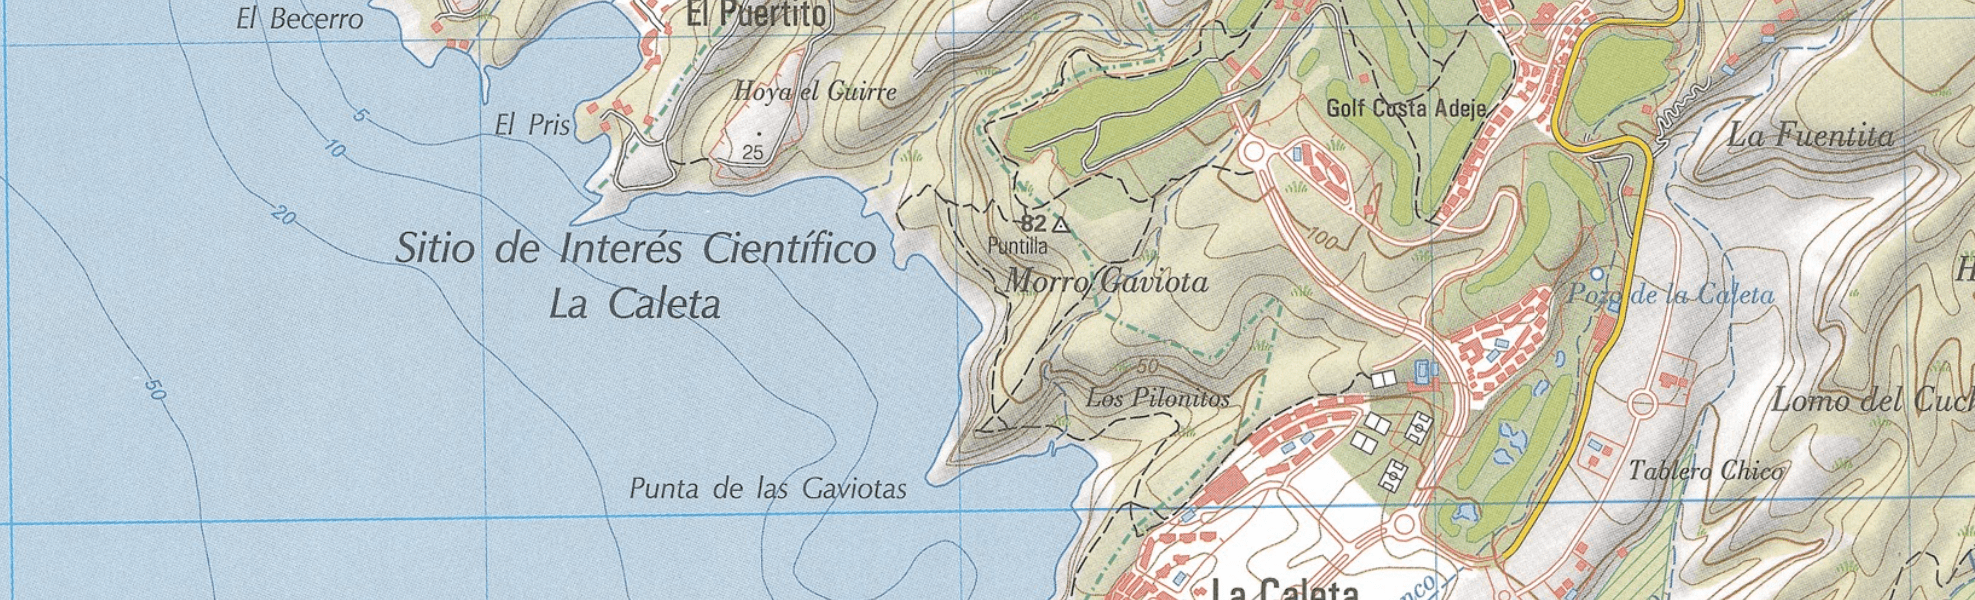 Figure 15. Topographical map of La Caleta site of scientific interest and El Puertito. Adapted from IGN (1999).